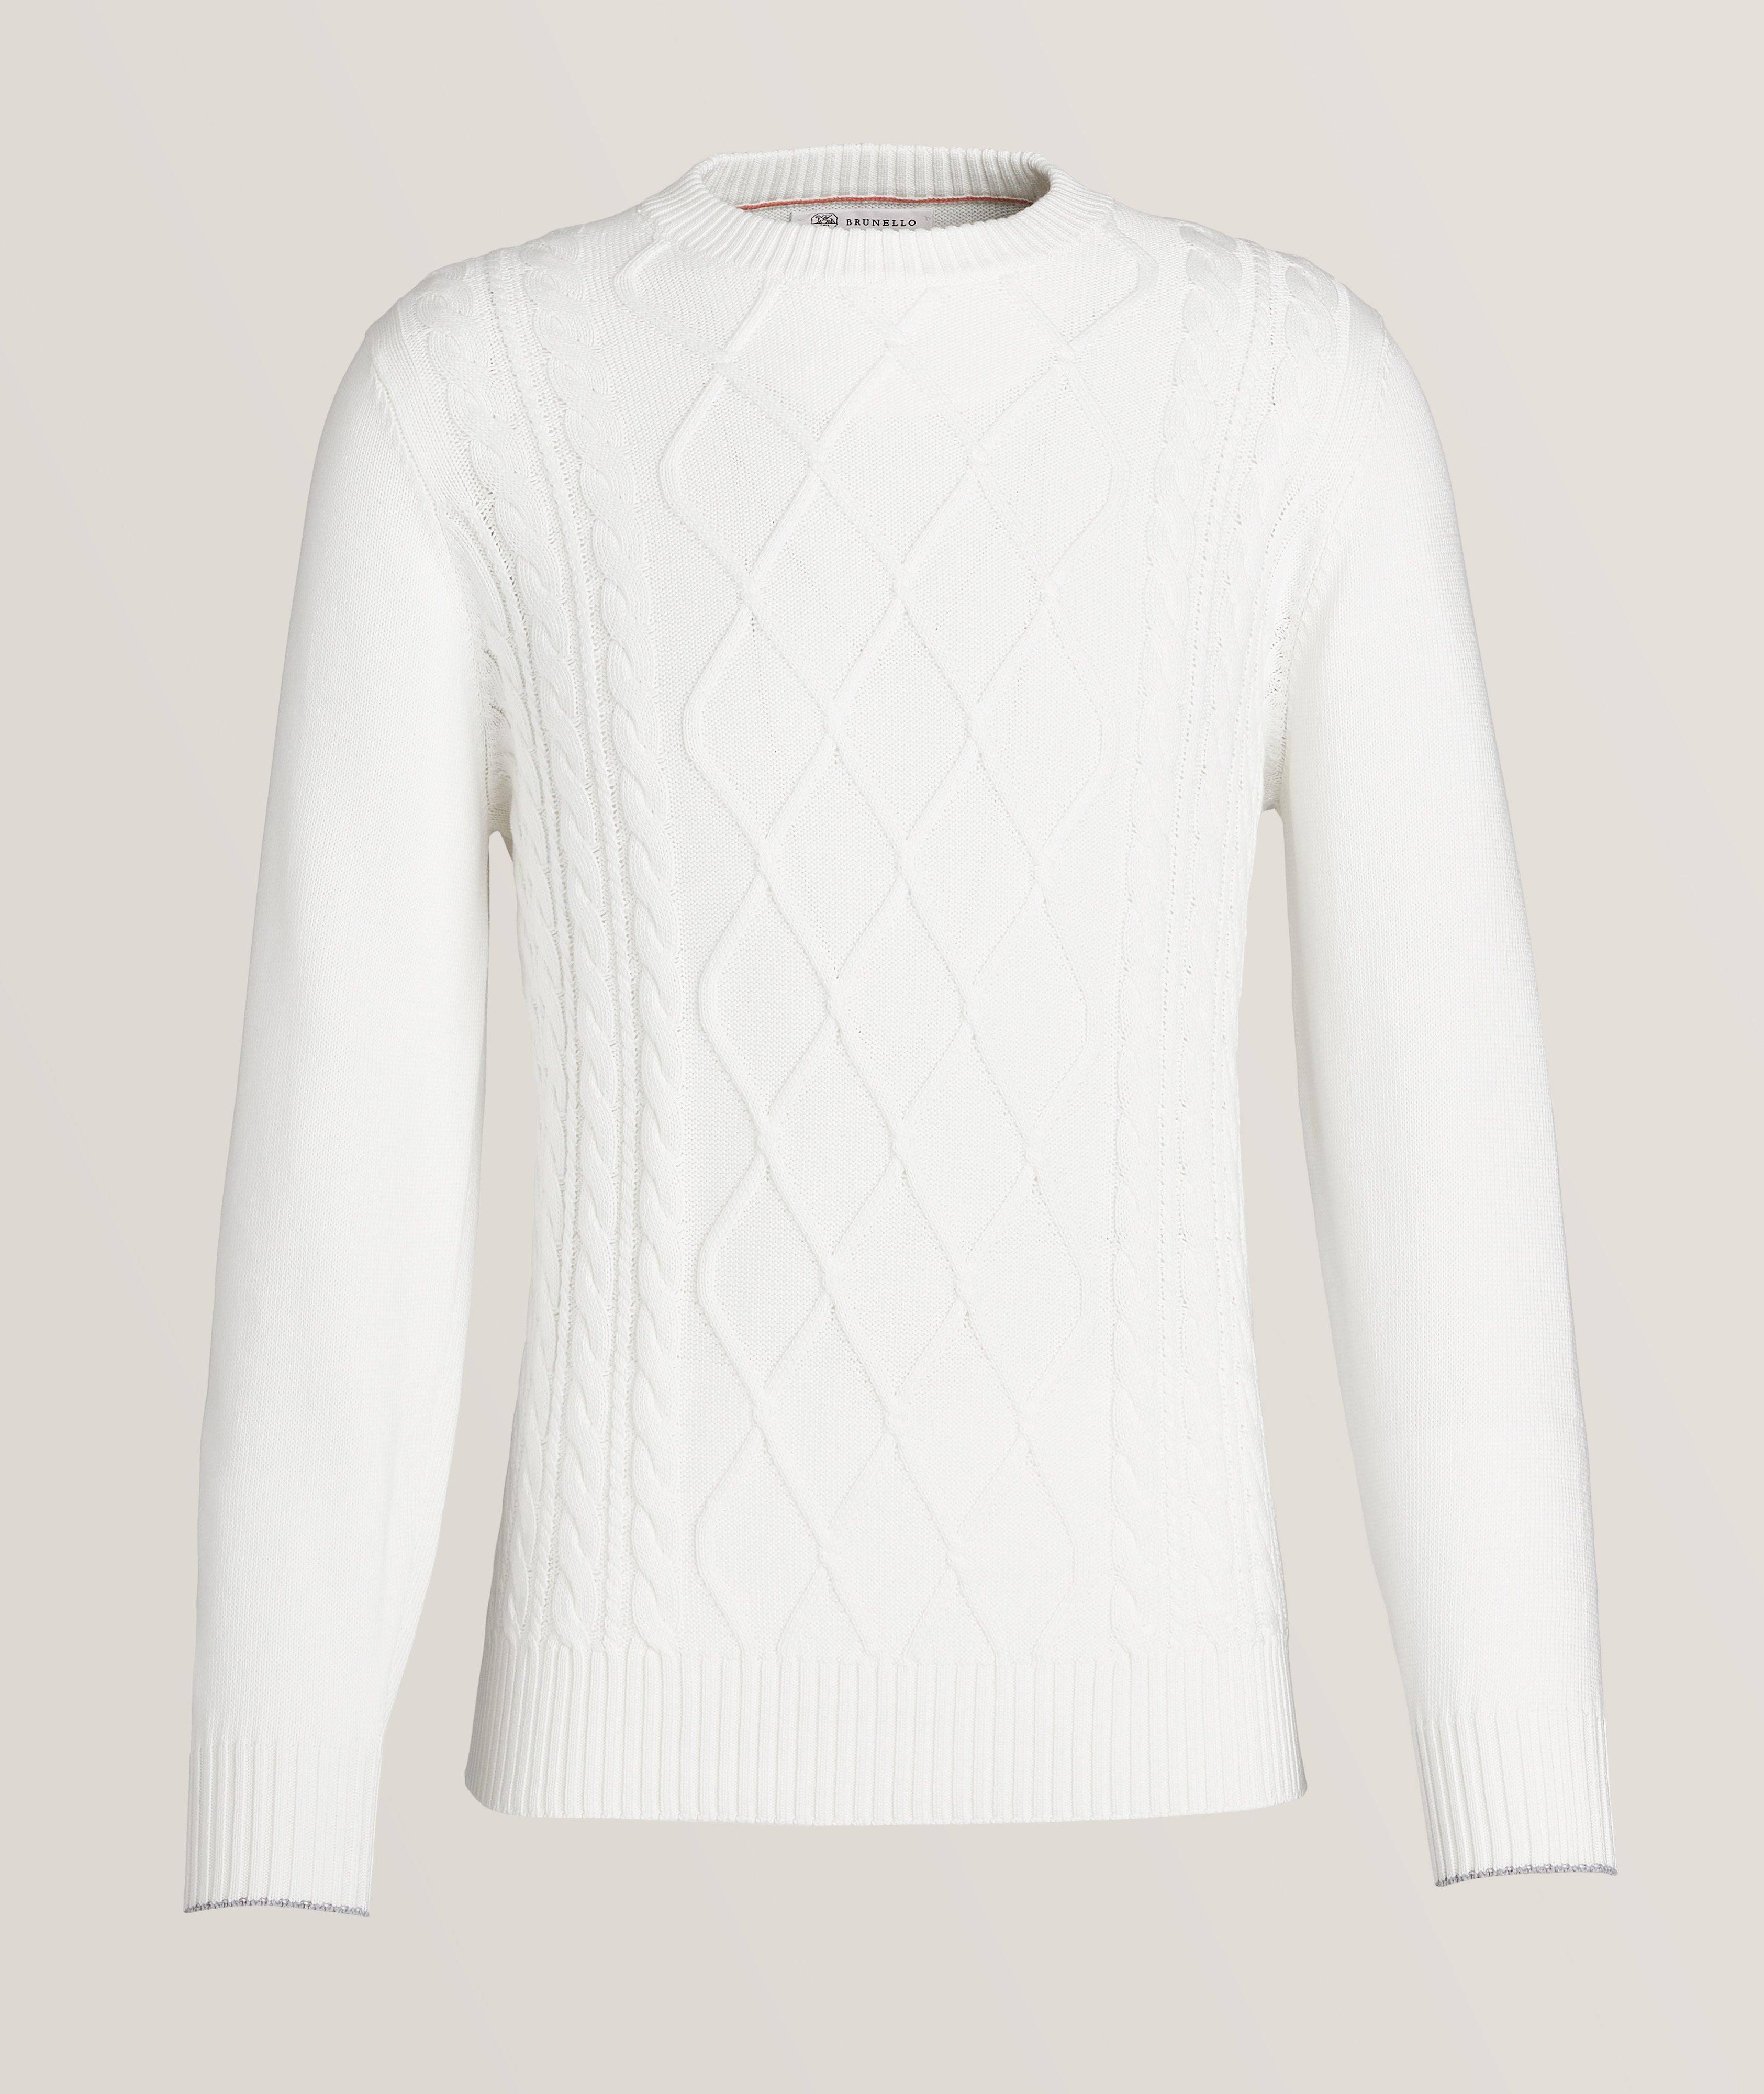 Cotton Cable Knit Sweater image 0